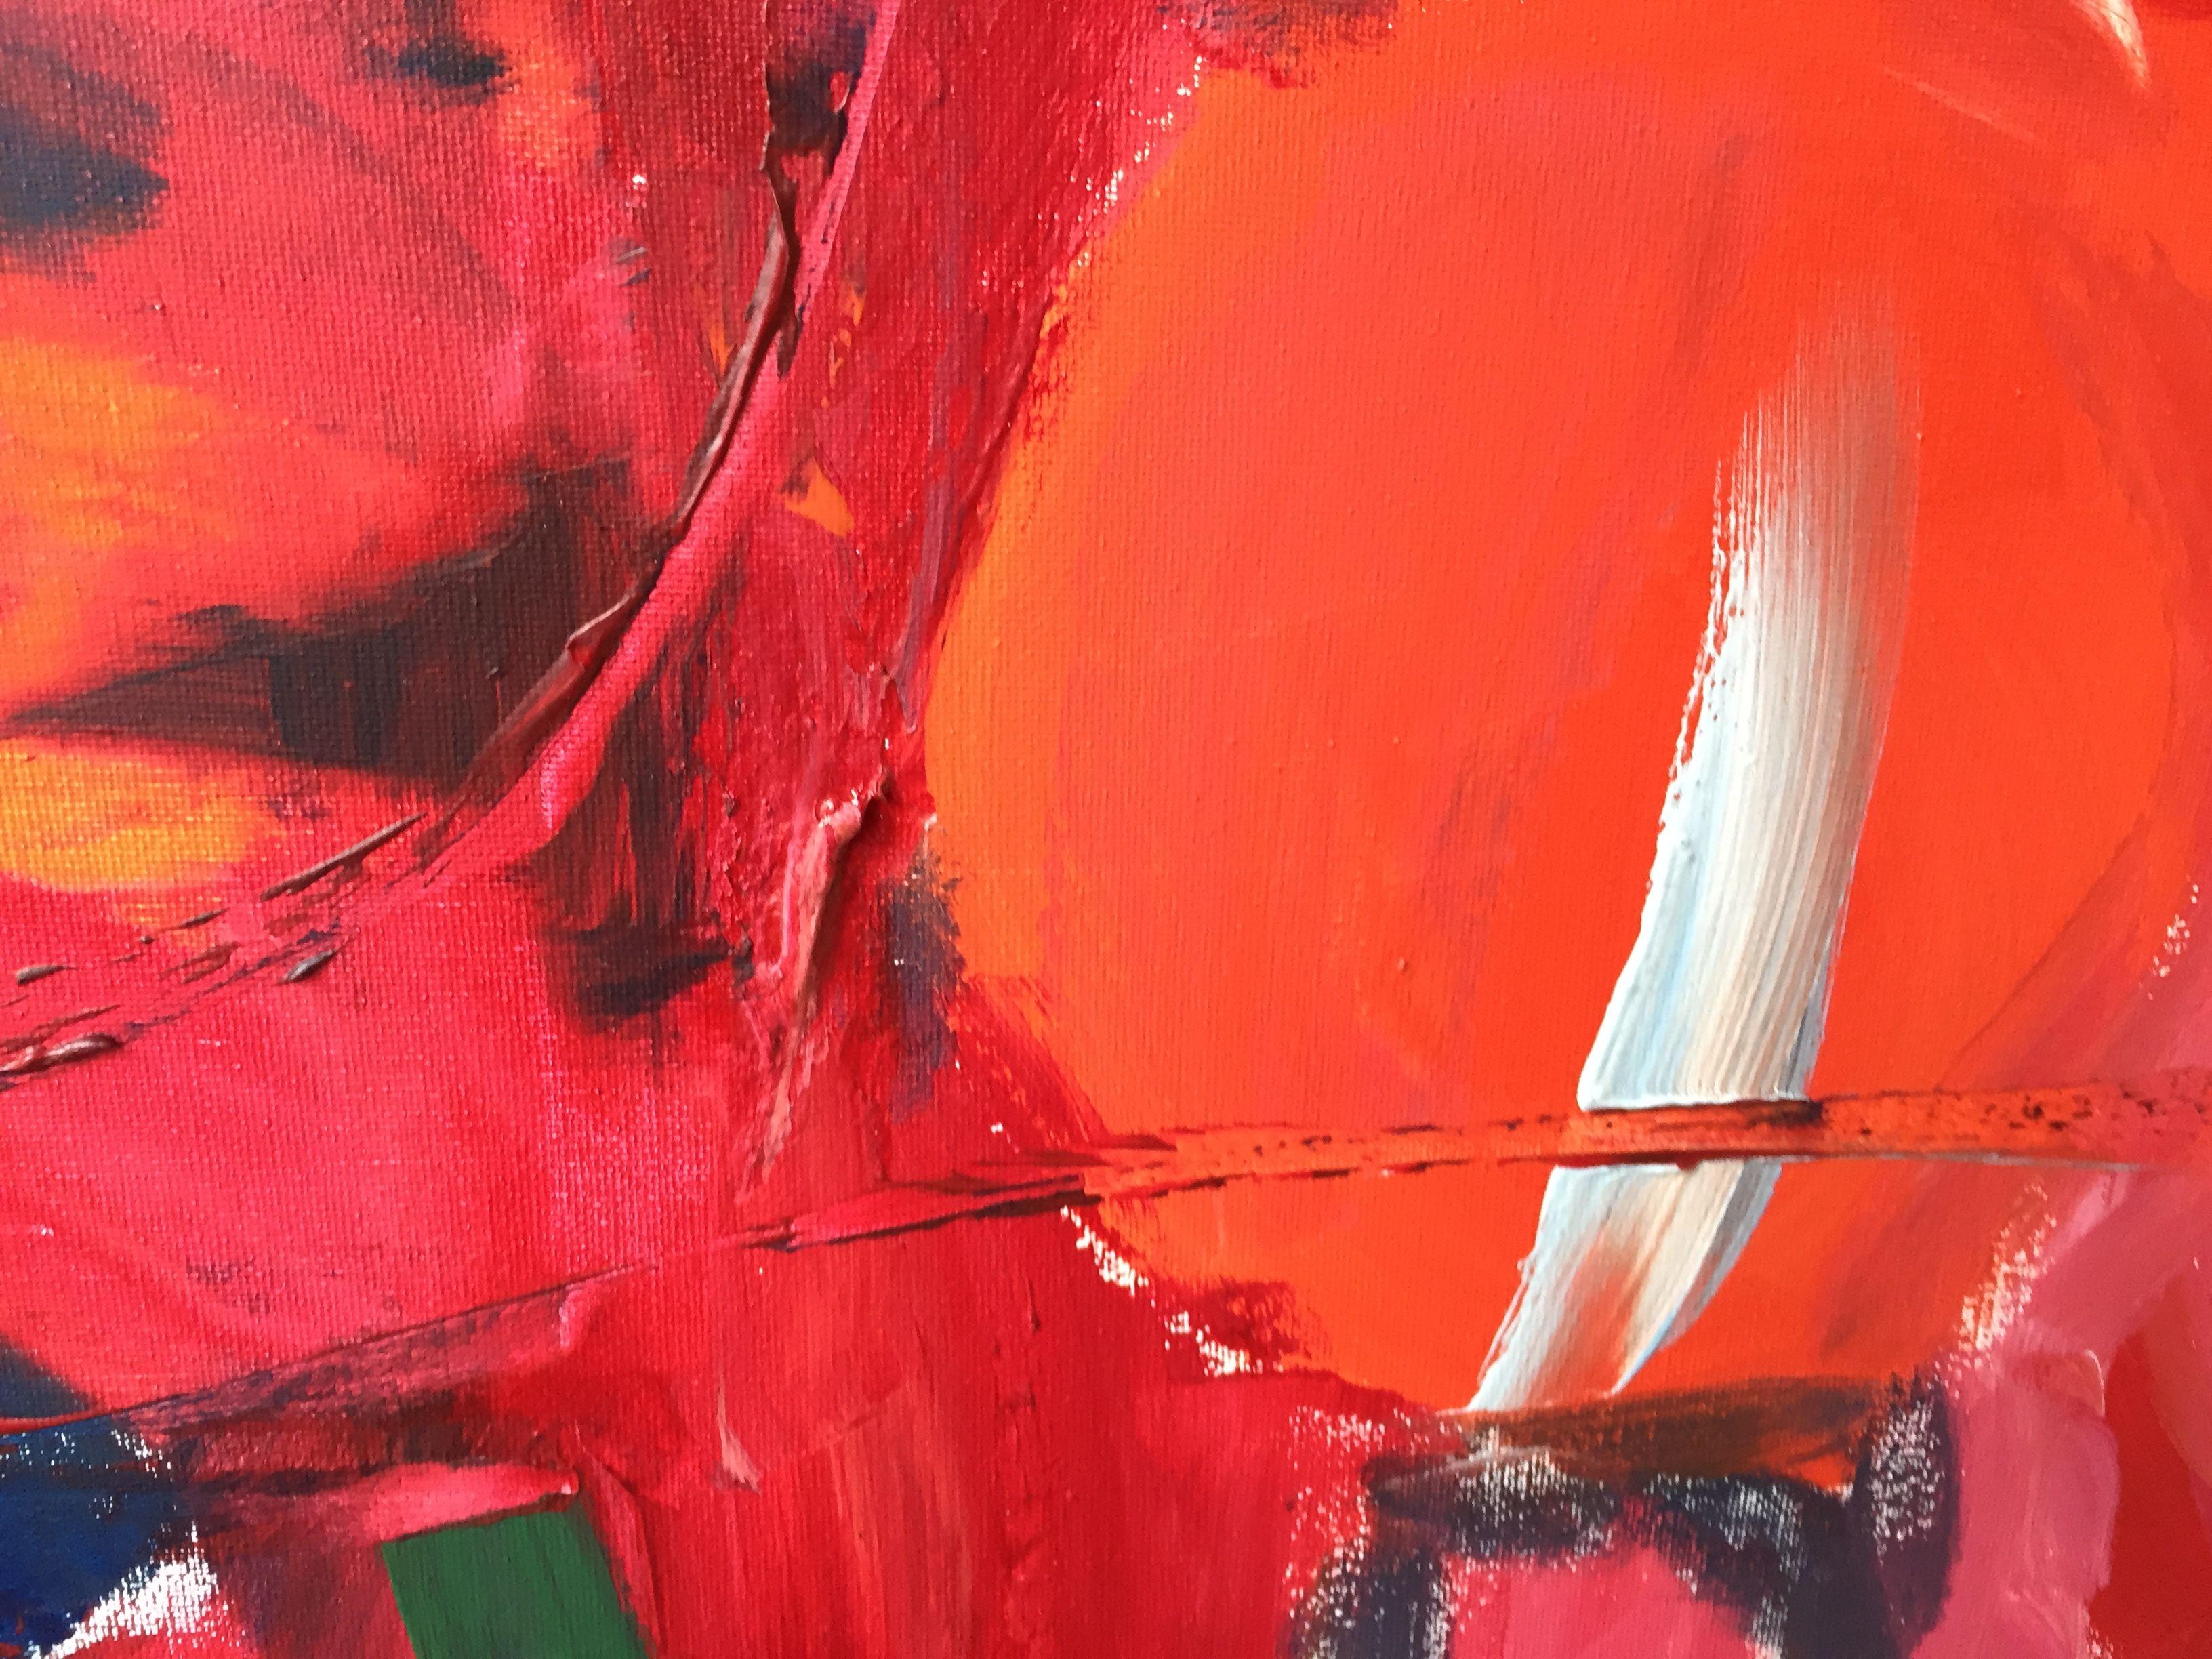 Flower Power, Painting, Acrylic on Canvas - Orange Abstract Painting by Christel Haag